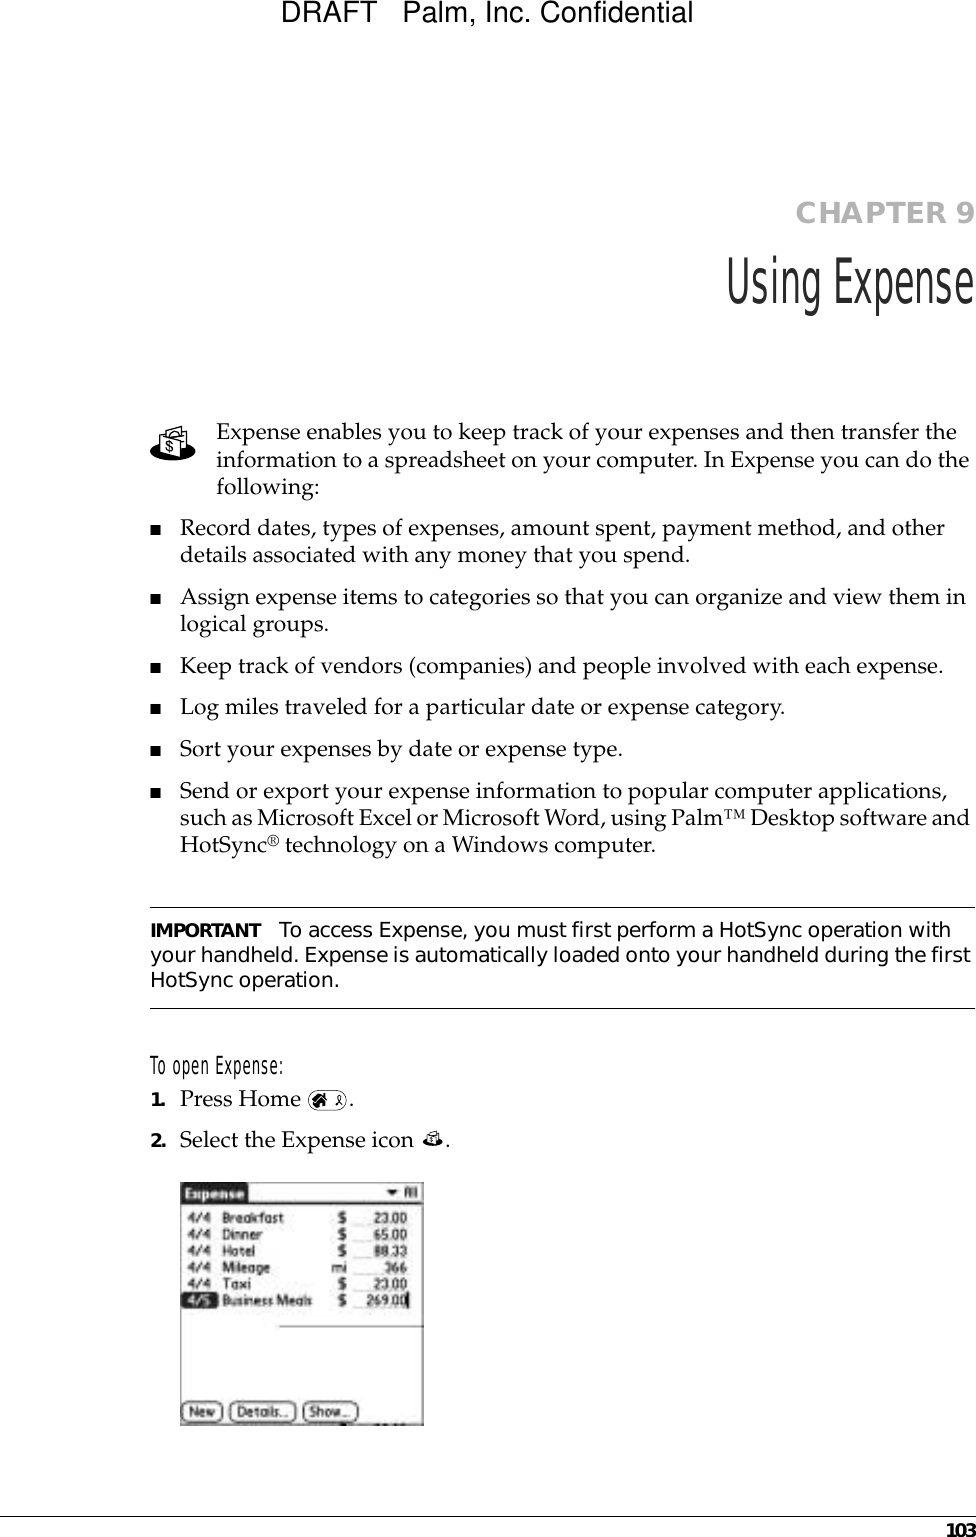 103CHAPTER 9Using ExpenseExpense enables you to keep track of your expenses and then transfer the information to a spreadsheet on your computer. In Expense you can do the following: ■Record dates, types of expenses, amount spent, payment method, and other details associated with any money that you spend.■Assign expense items to categories so that you can organize and view them in logical groups.■Keep track of vendors (companies) and people involved with each expense.■Log miles traveled for a particular date or expense category.■Sort your expenses by date or expense type.■Send or export your expense information to popular computer applications, such as Microsoft Excel or Microsoft Word, using Palm™ Desktop software and HotSync® technology on a Windows computer.IMPORTANT To access Expense, you must first perform a HotSync operation with your handheld. Expense is automatically loaded onto your handheld during the first HotSync operation. To open Expense:1. Press Home  .2. Select the Expense icon  . DRAFT   Palm, Inc. Confidential